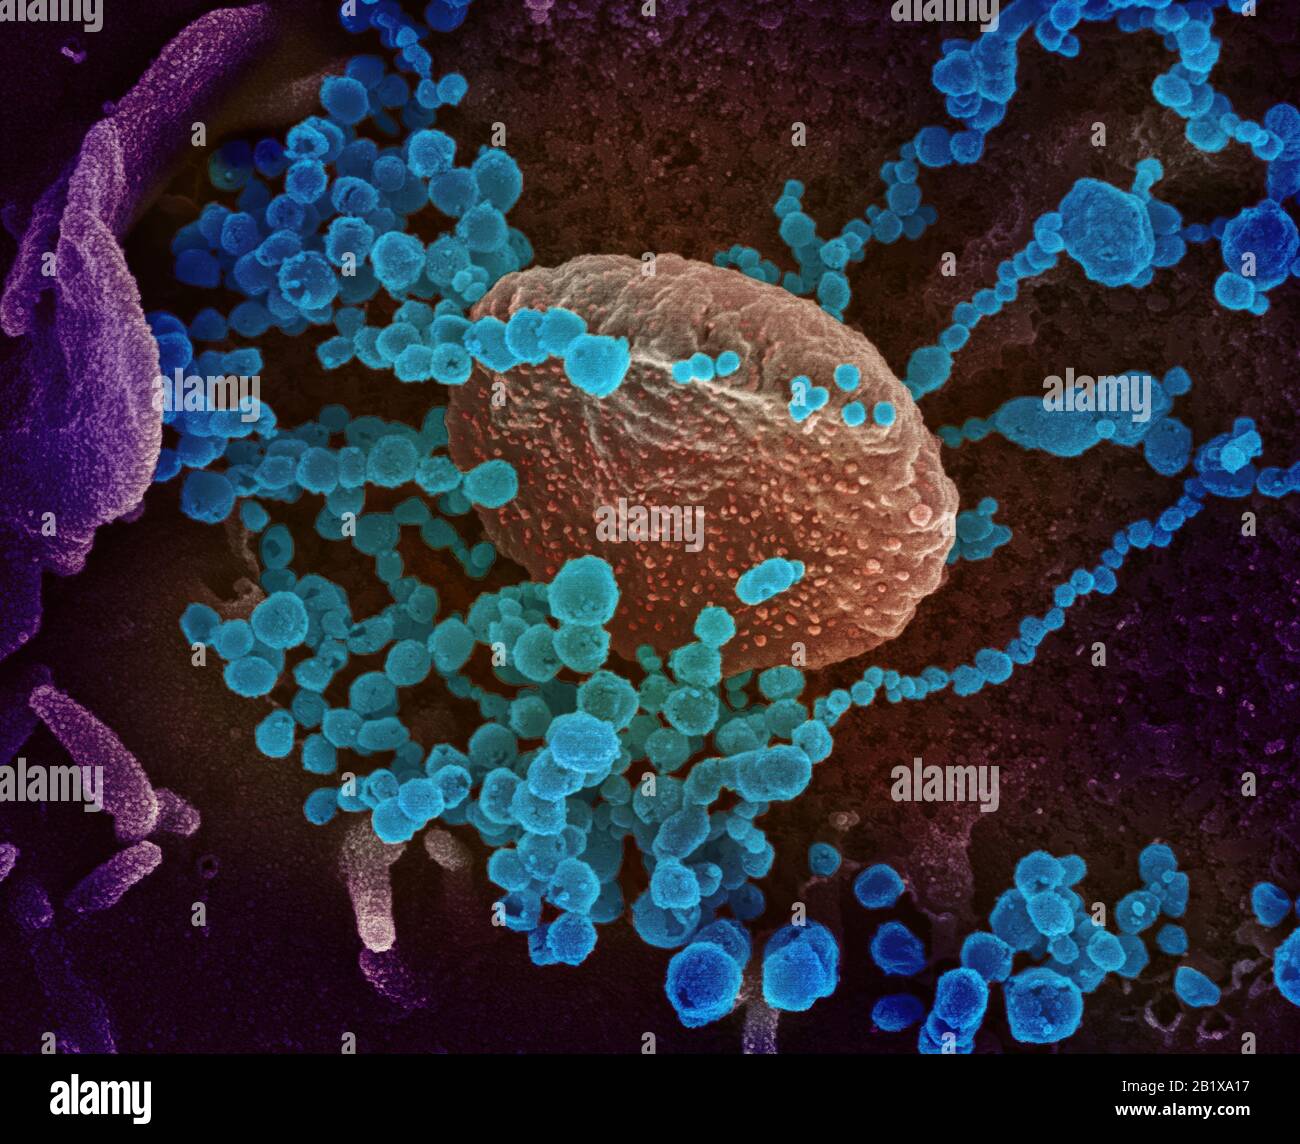 COVID-19. Novel Coronavirus SARS-CoV-2  This scanning electron microscope image shows SARS-CoV-2 (round blue objects) emerging from the surface of cells cultured in the lab. SARS-CoV-2, also known as 2019-nCoV, is the virus that causes COVID-19. The virus shown was isolated from a patient in the U.S. Credit: NIAID-RML Stock Photo